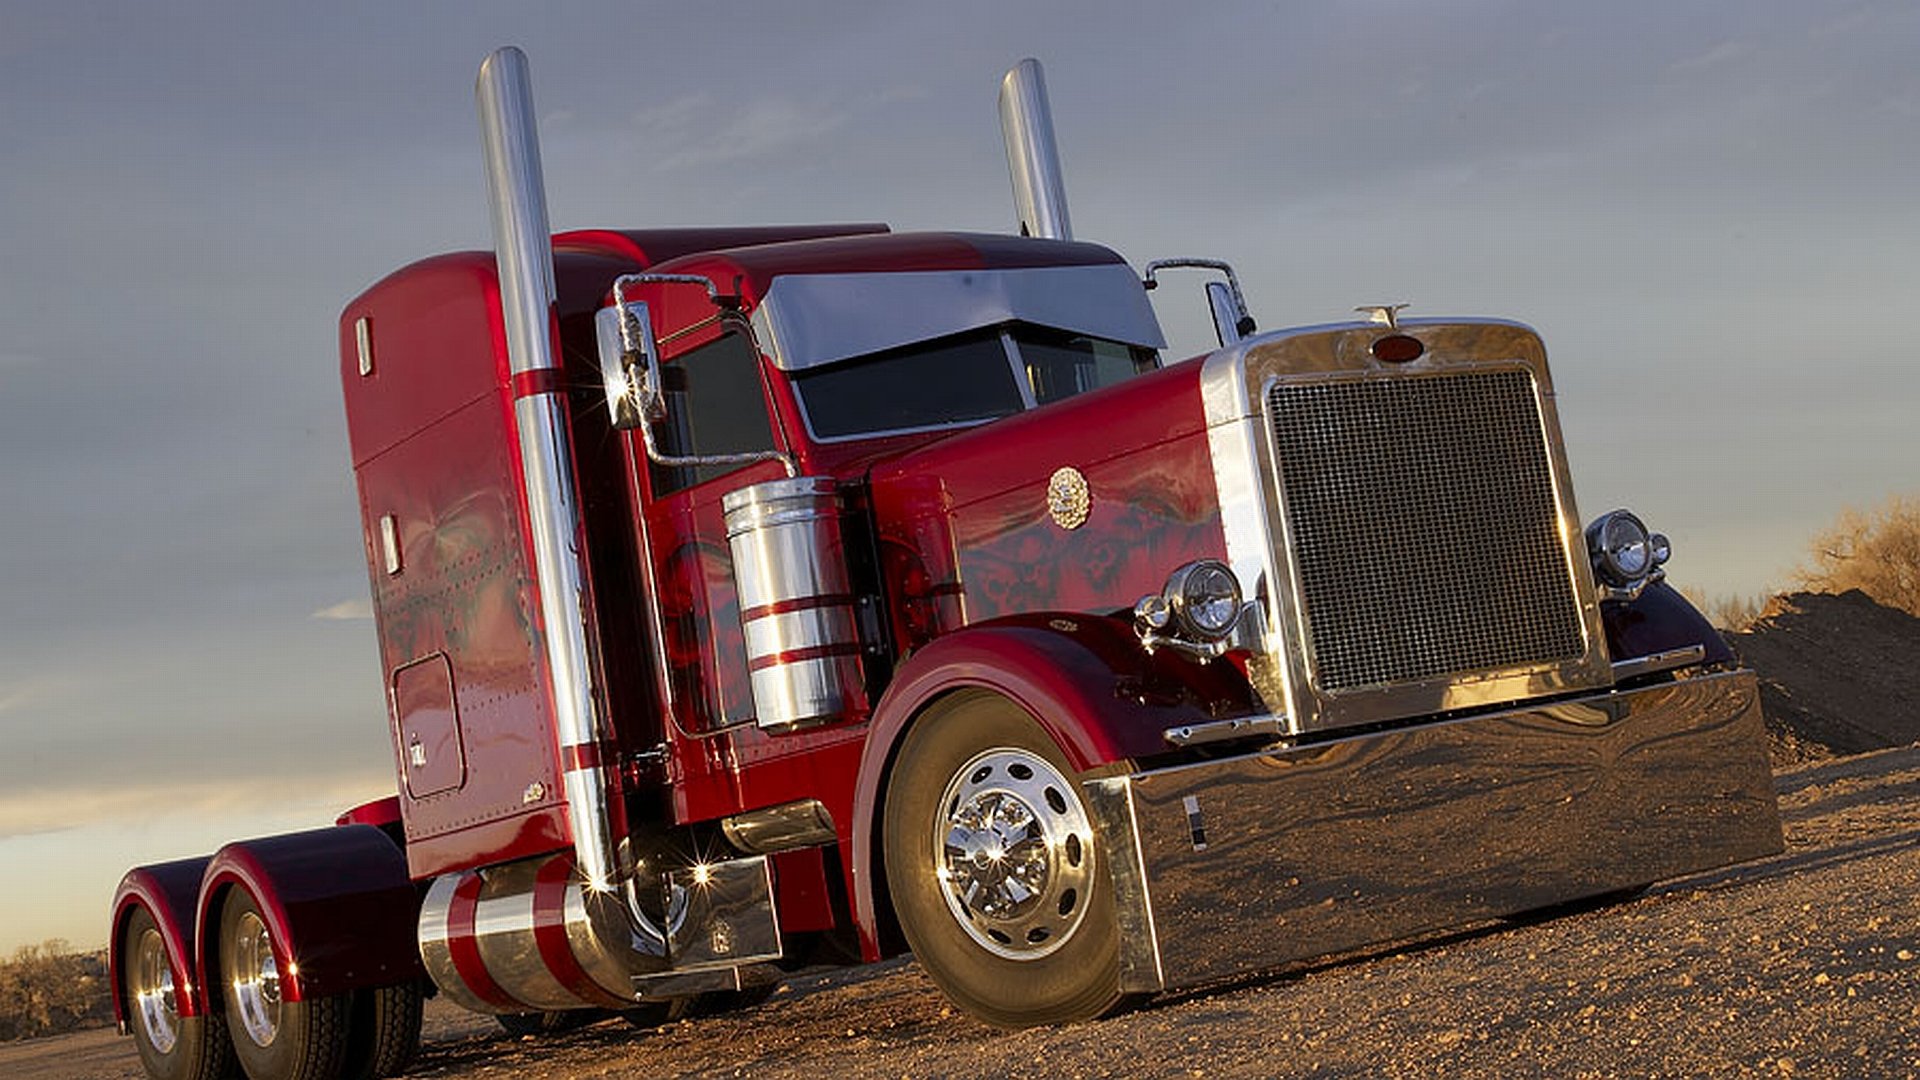 Free Truck high quality wallpaper ID:477807 for hd 1920x1080 computer